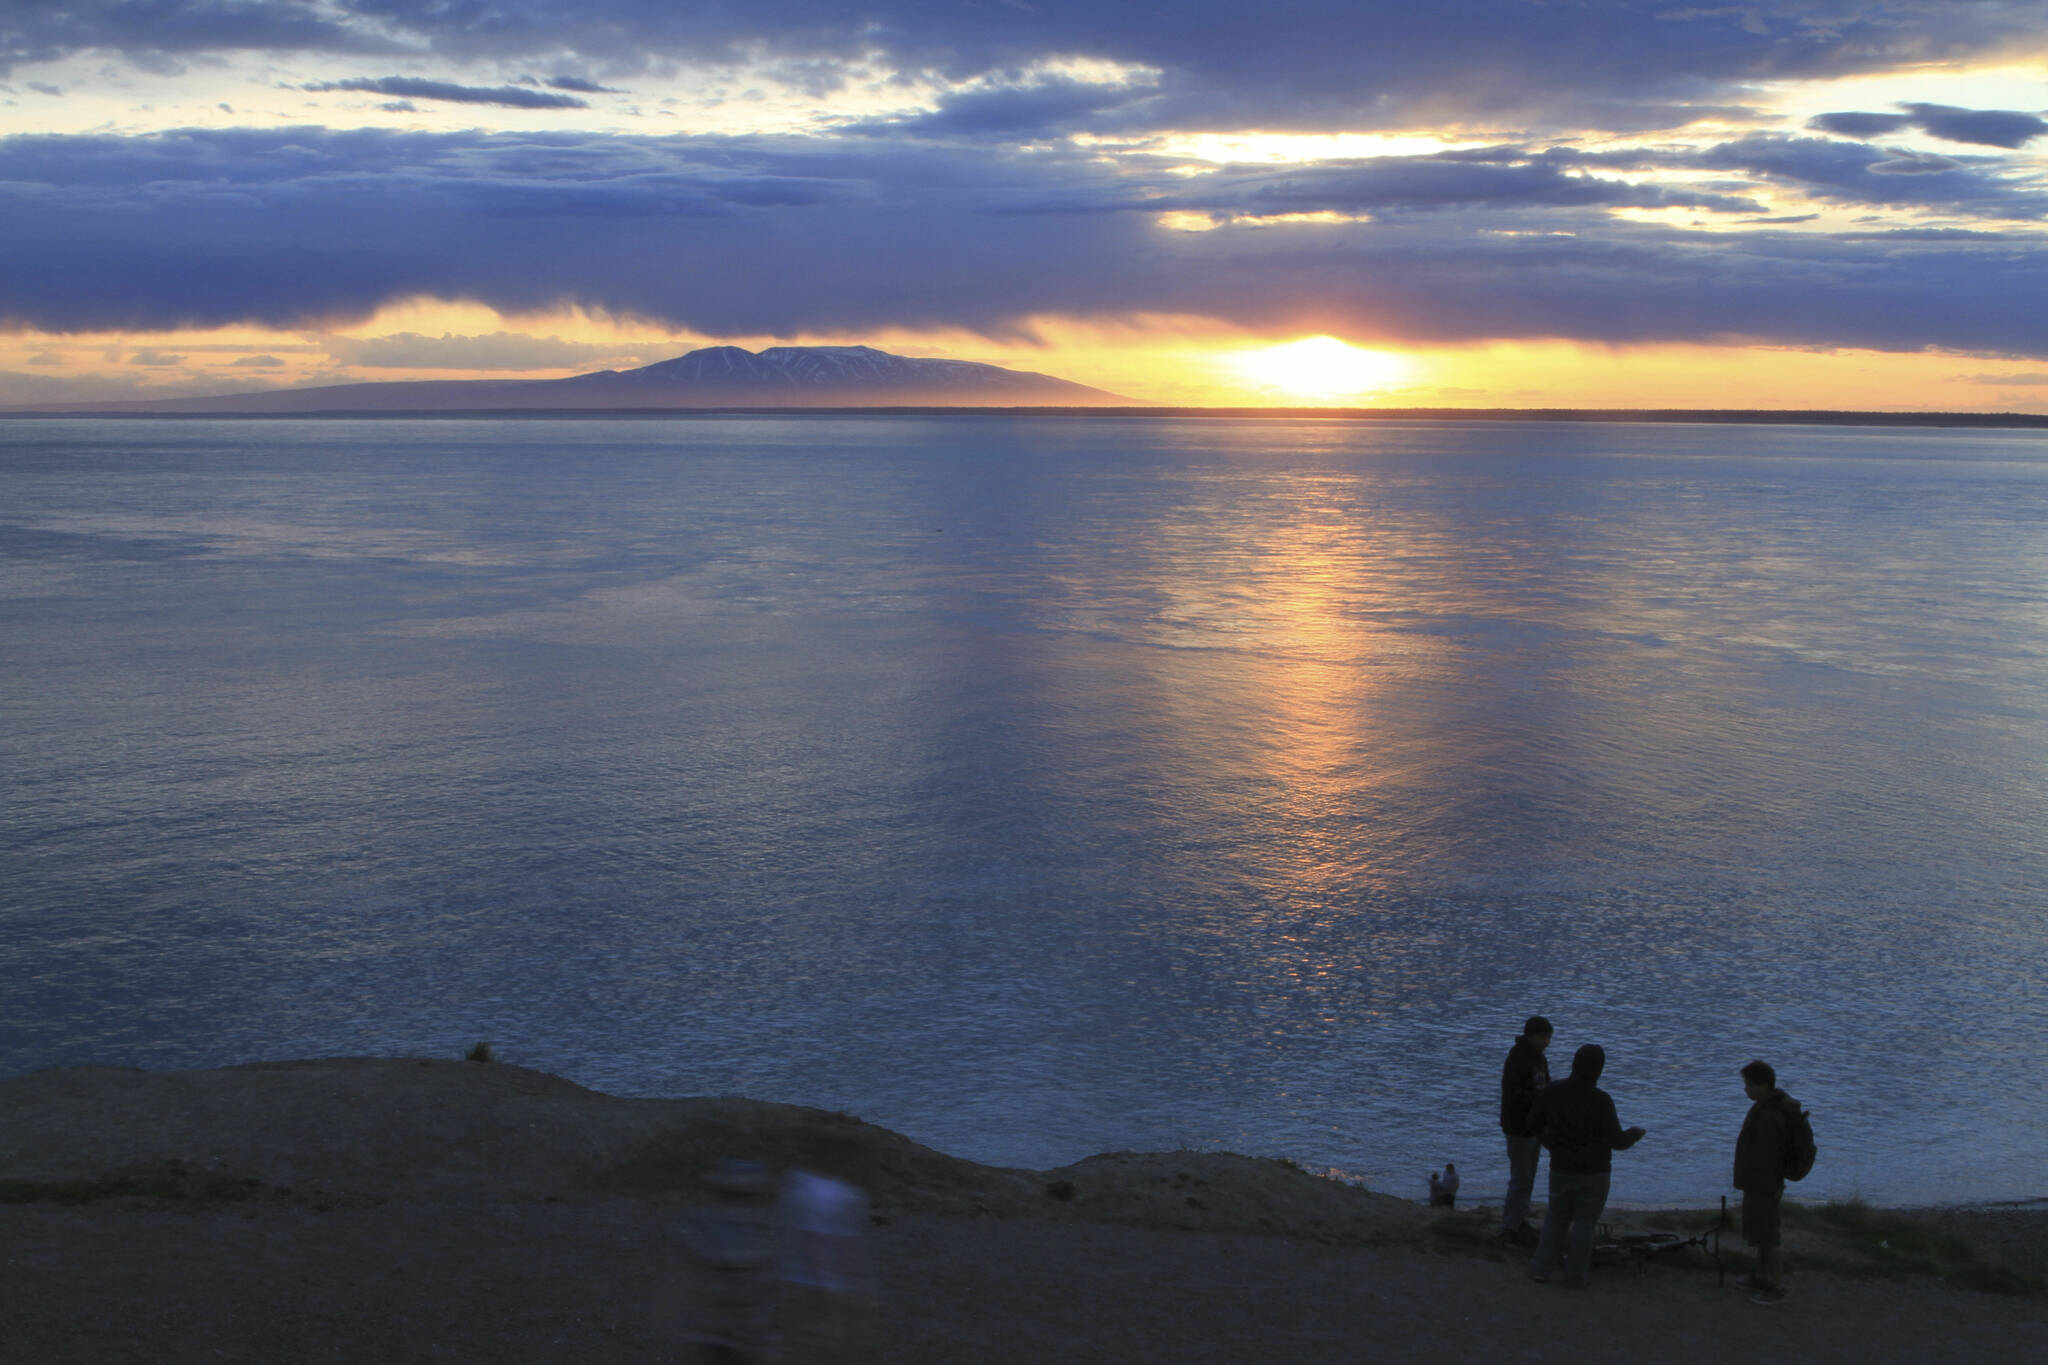 Visitors to Point Woronzof Park watch the sun set over Cook Inlet and Mount Susitna, also known as Sleeping Lady, on June 7, 2013, in Anchorage, Alaska. Alaska Gov. Mike Dunleavy has proposed a plan that could use the Cook Inlet basin for carbon sequestration. (AP Photo / Dan Joling)